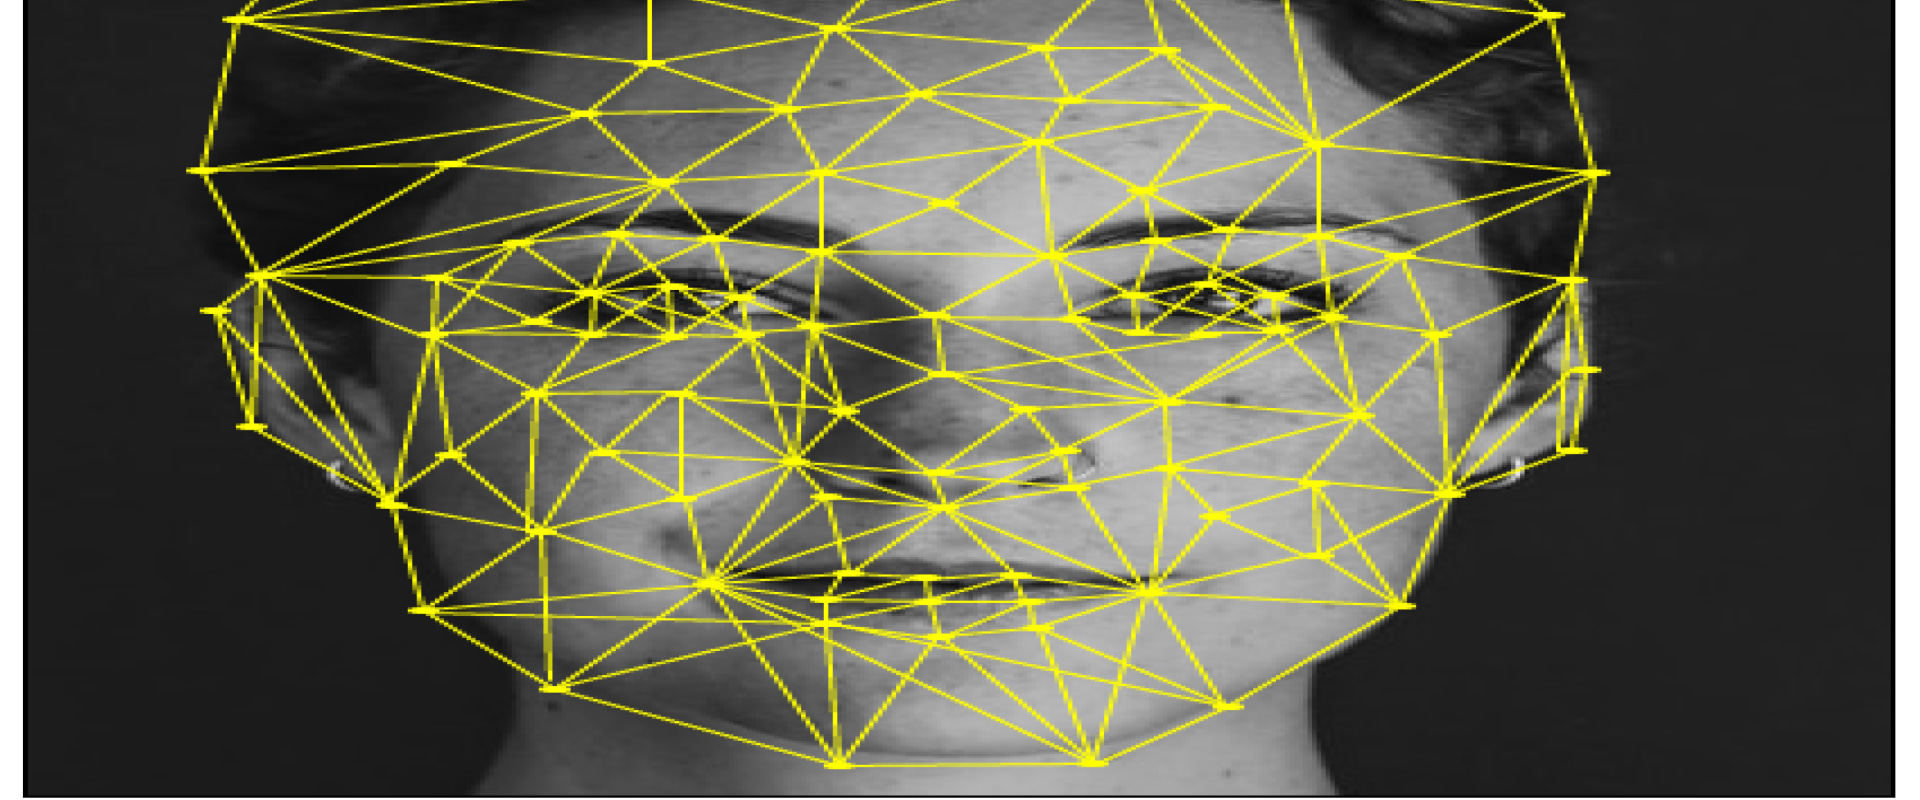 Face Detection and Tracking Performance: A Comprehensive Review